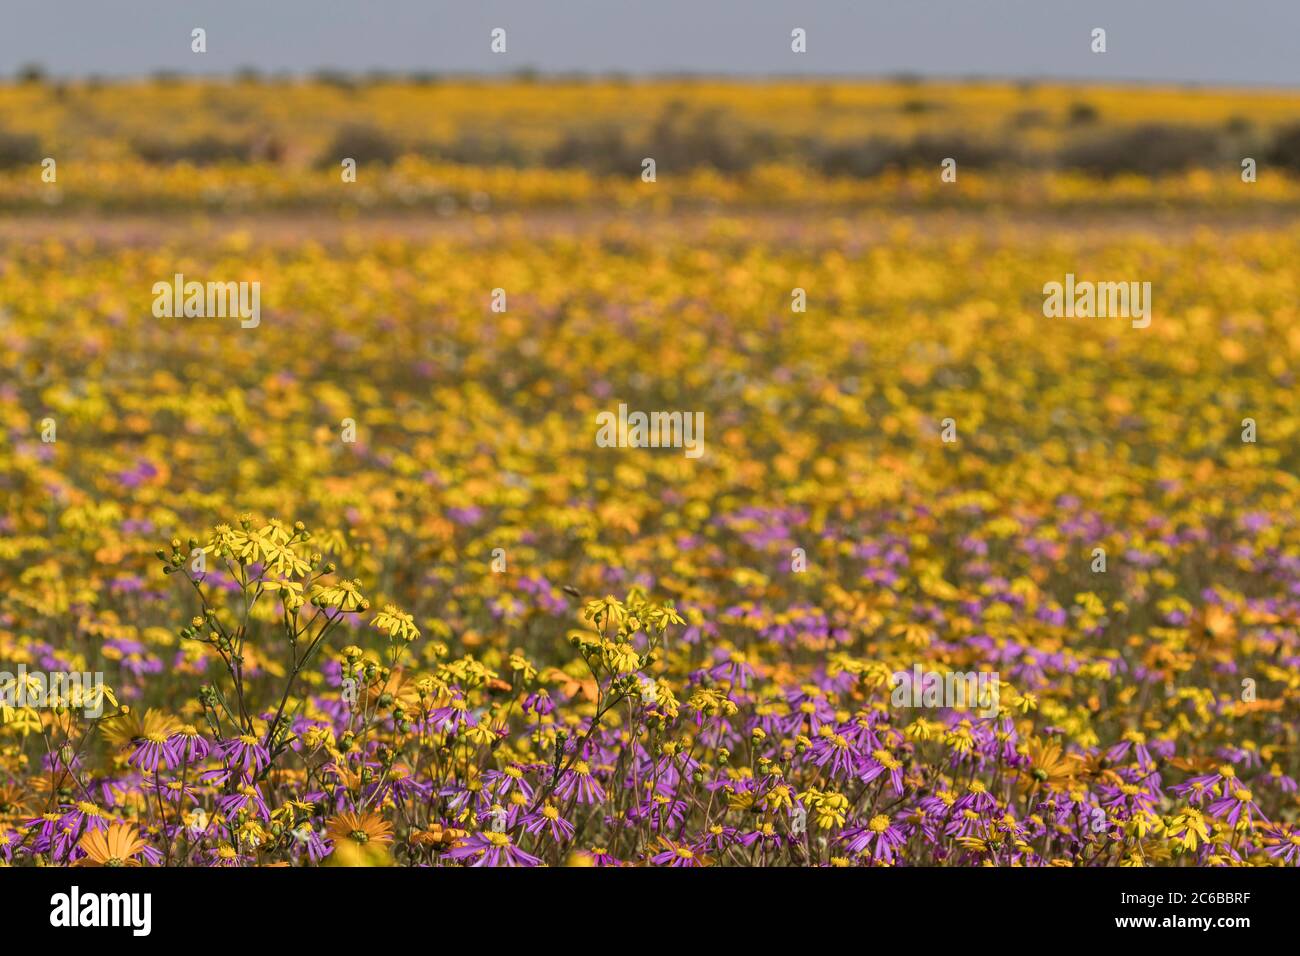 Namaqualand spring flowers, Matjiesfontein farm, Nieuwoudtville, Namaqualand, South Africa, Africa Stock Photo